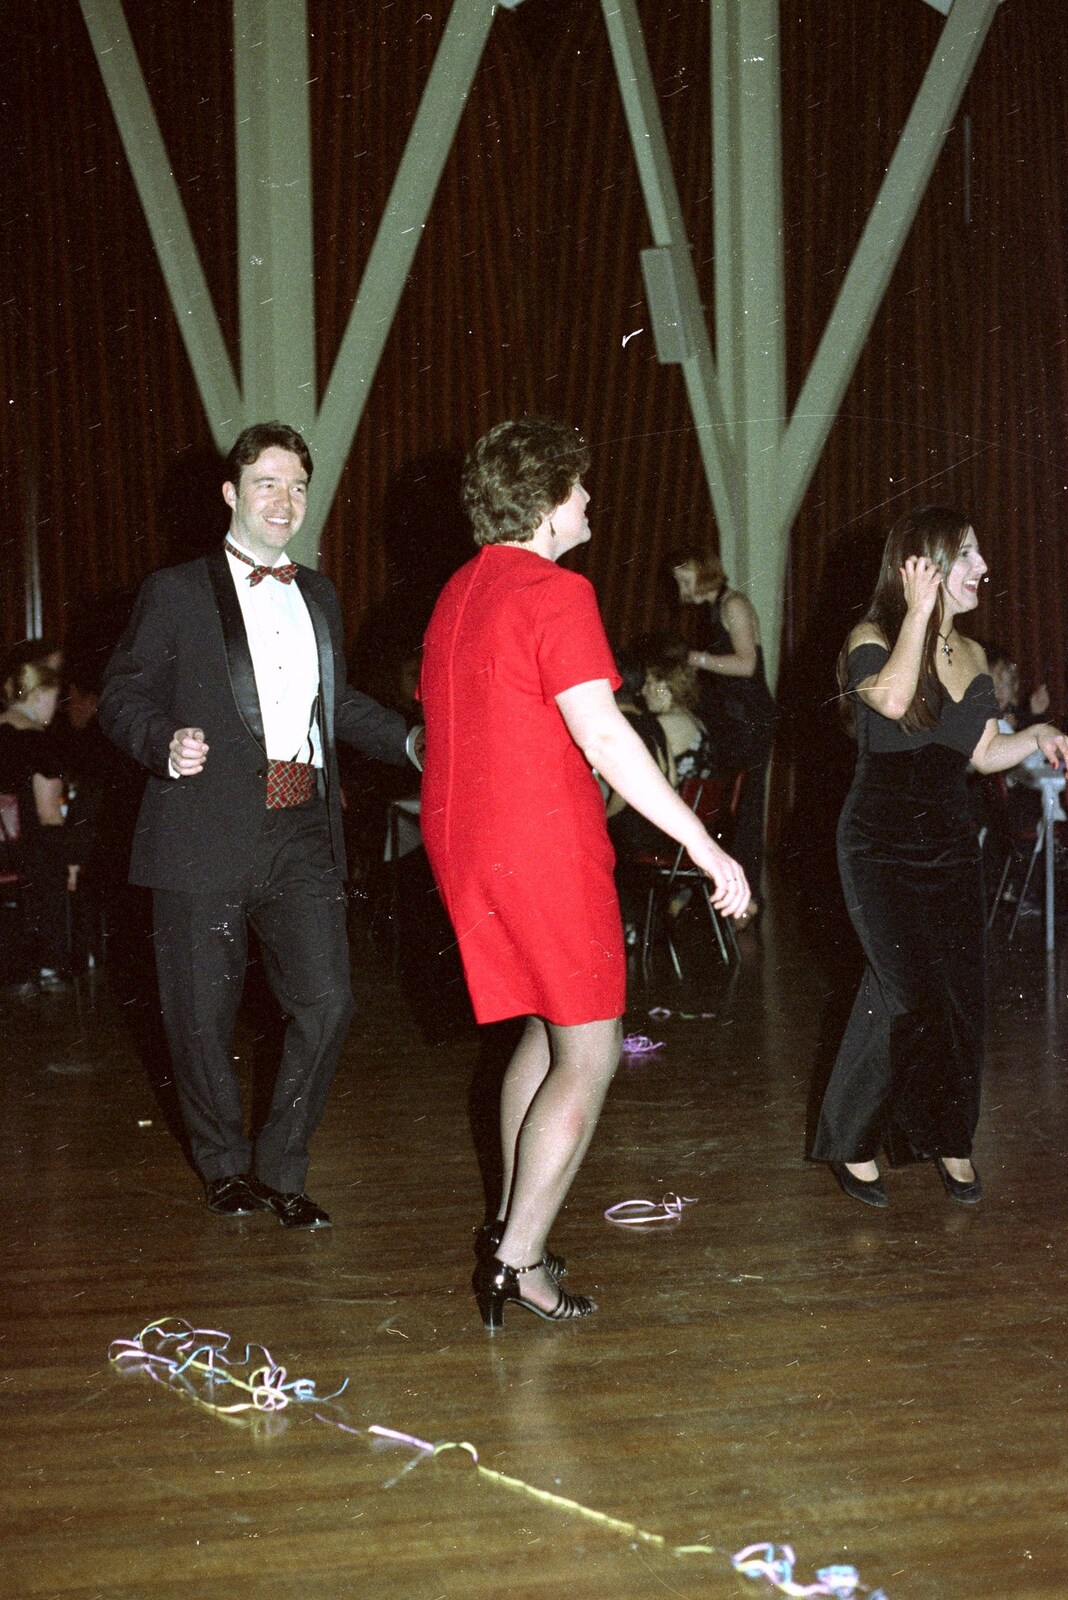 Tim does some, what looks like, dad dancing from CISU at the Suffolk College May Ball, Ipswich, Suffolk - 11th May 1997